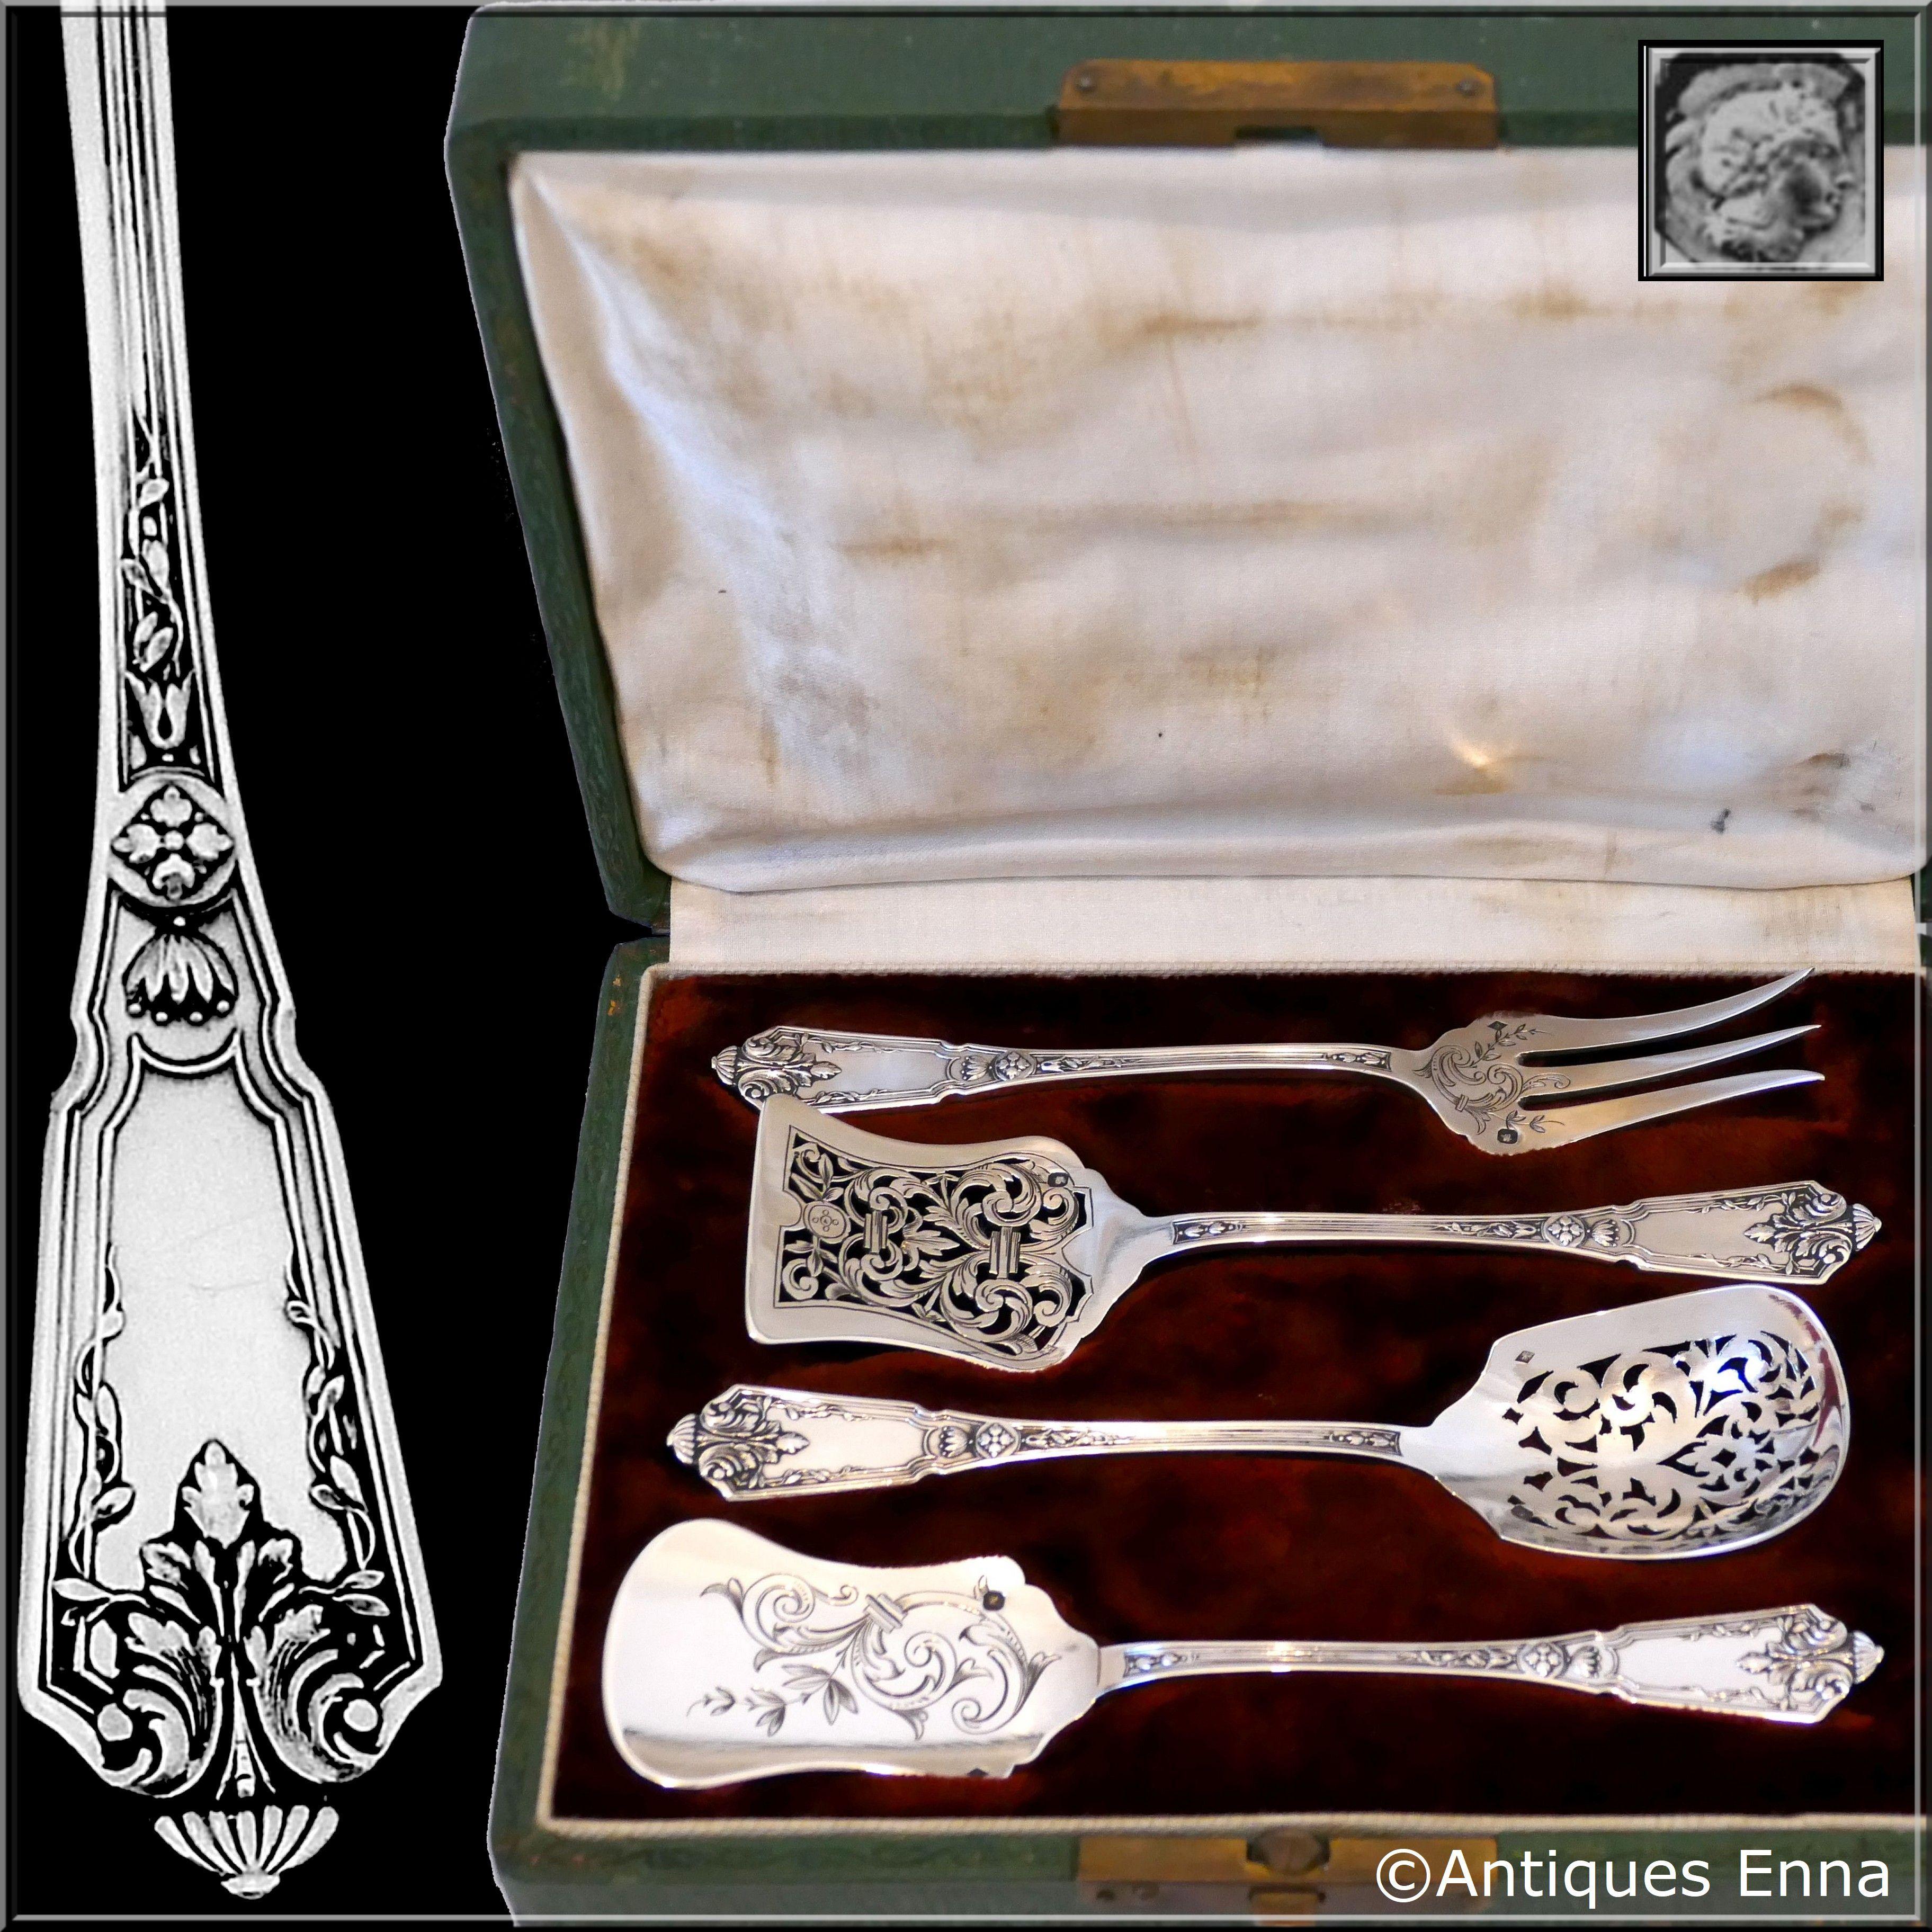 Head of Minerve 1st titre for 950/1000 French sterling silver guarantee. 

An exceptional set from the point of view of its design as well as the quality of the engraving. In Regency, Louis XIV style, the upper parts and spatulas are decorated with